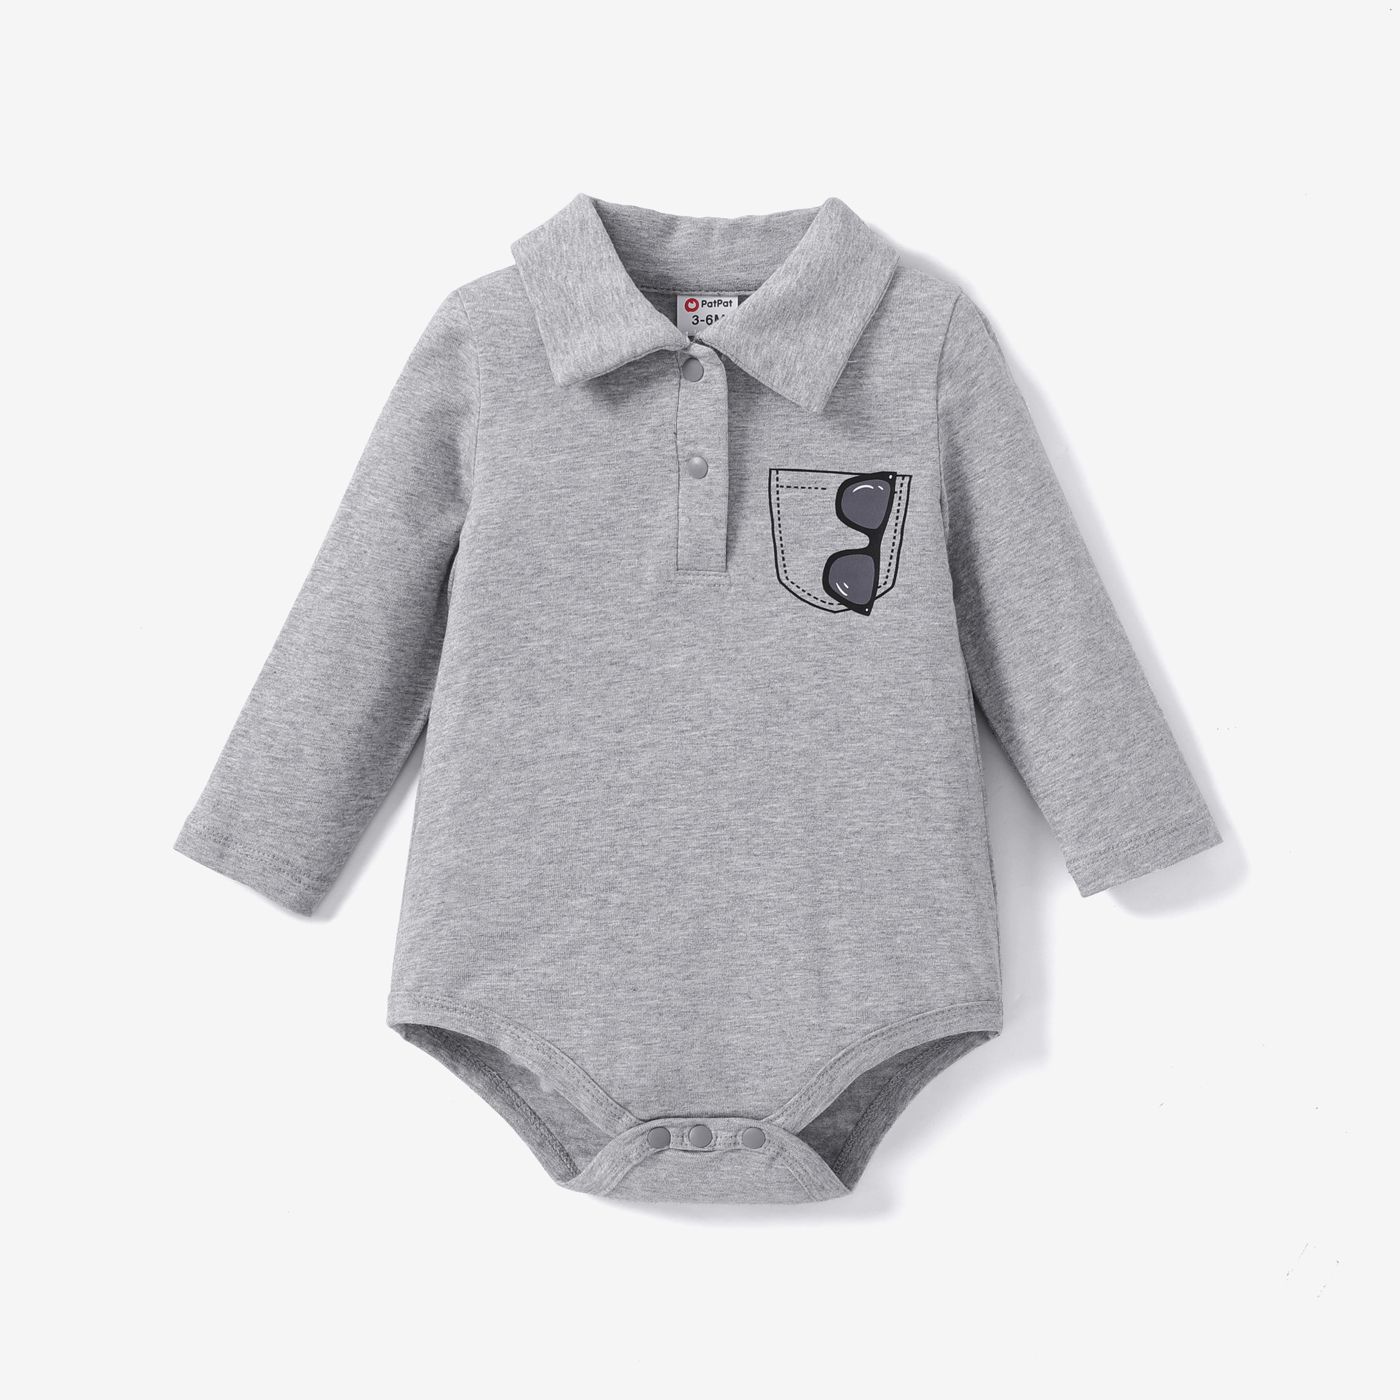 Baby Boy Cotton Casual Long Sleeve Romper